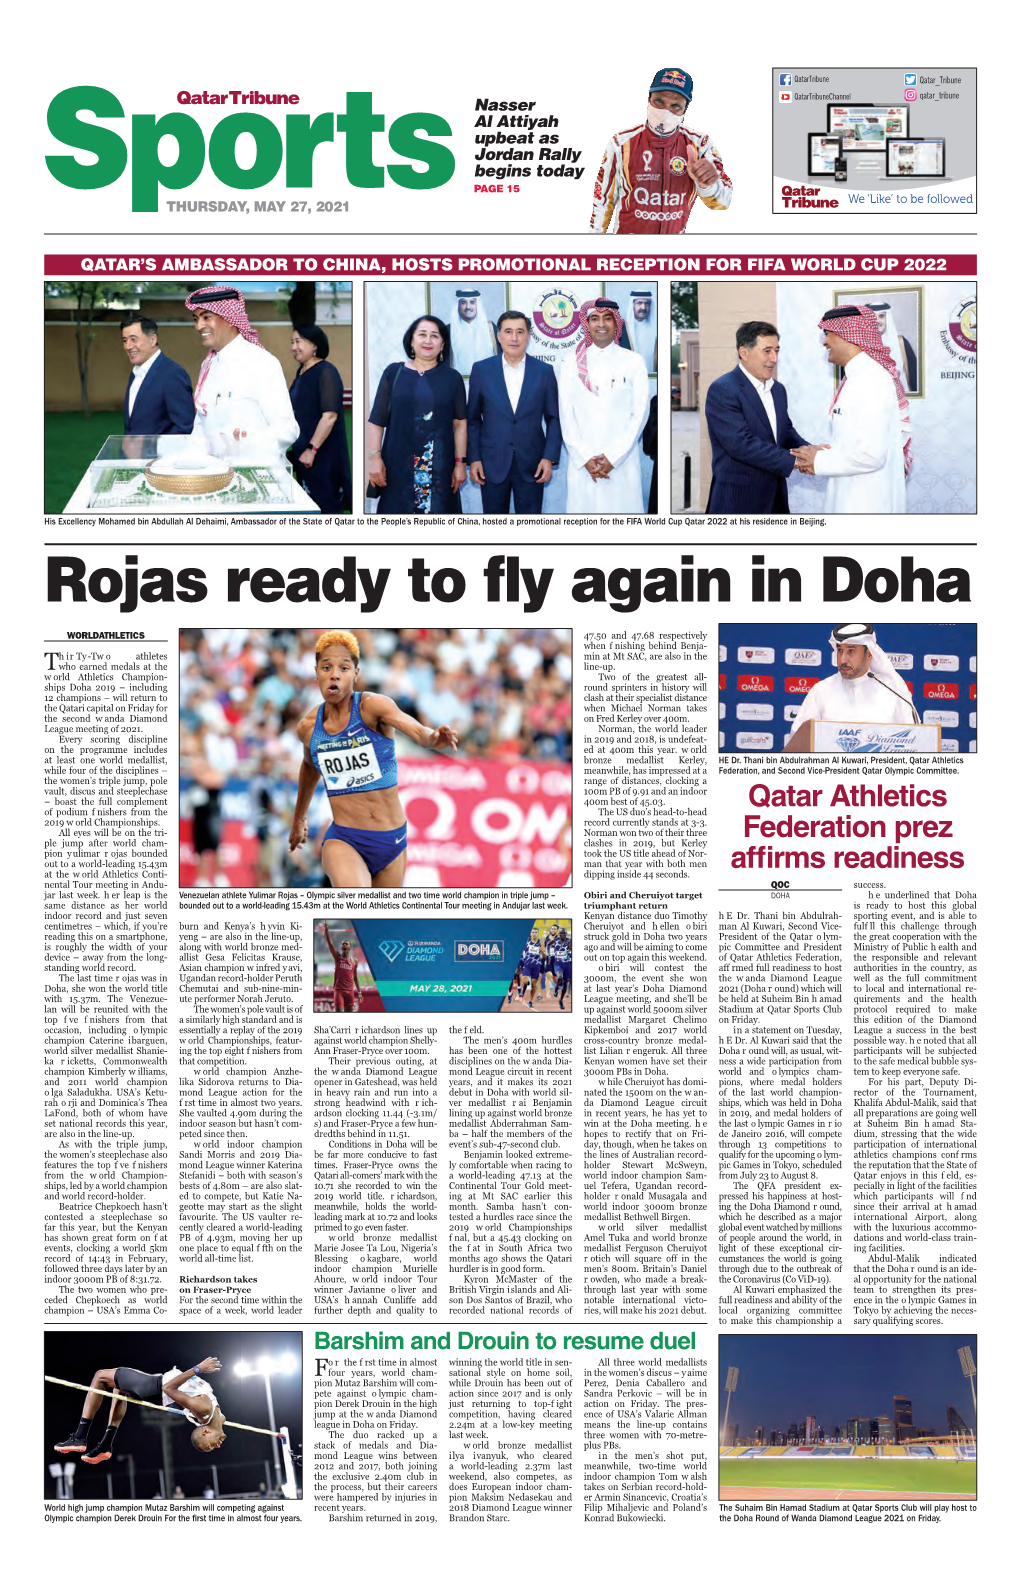 Rojas Ready to Fly Again in Doha